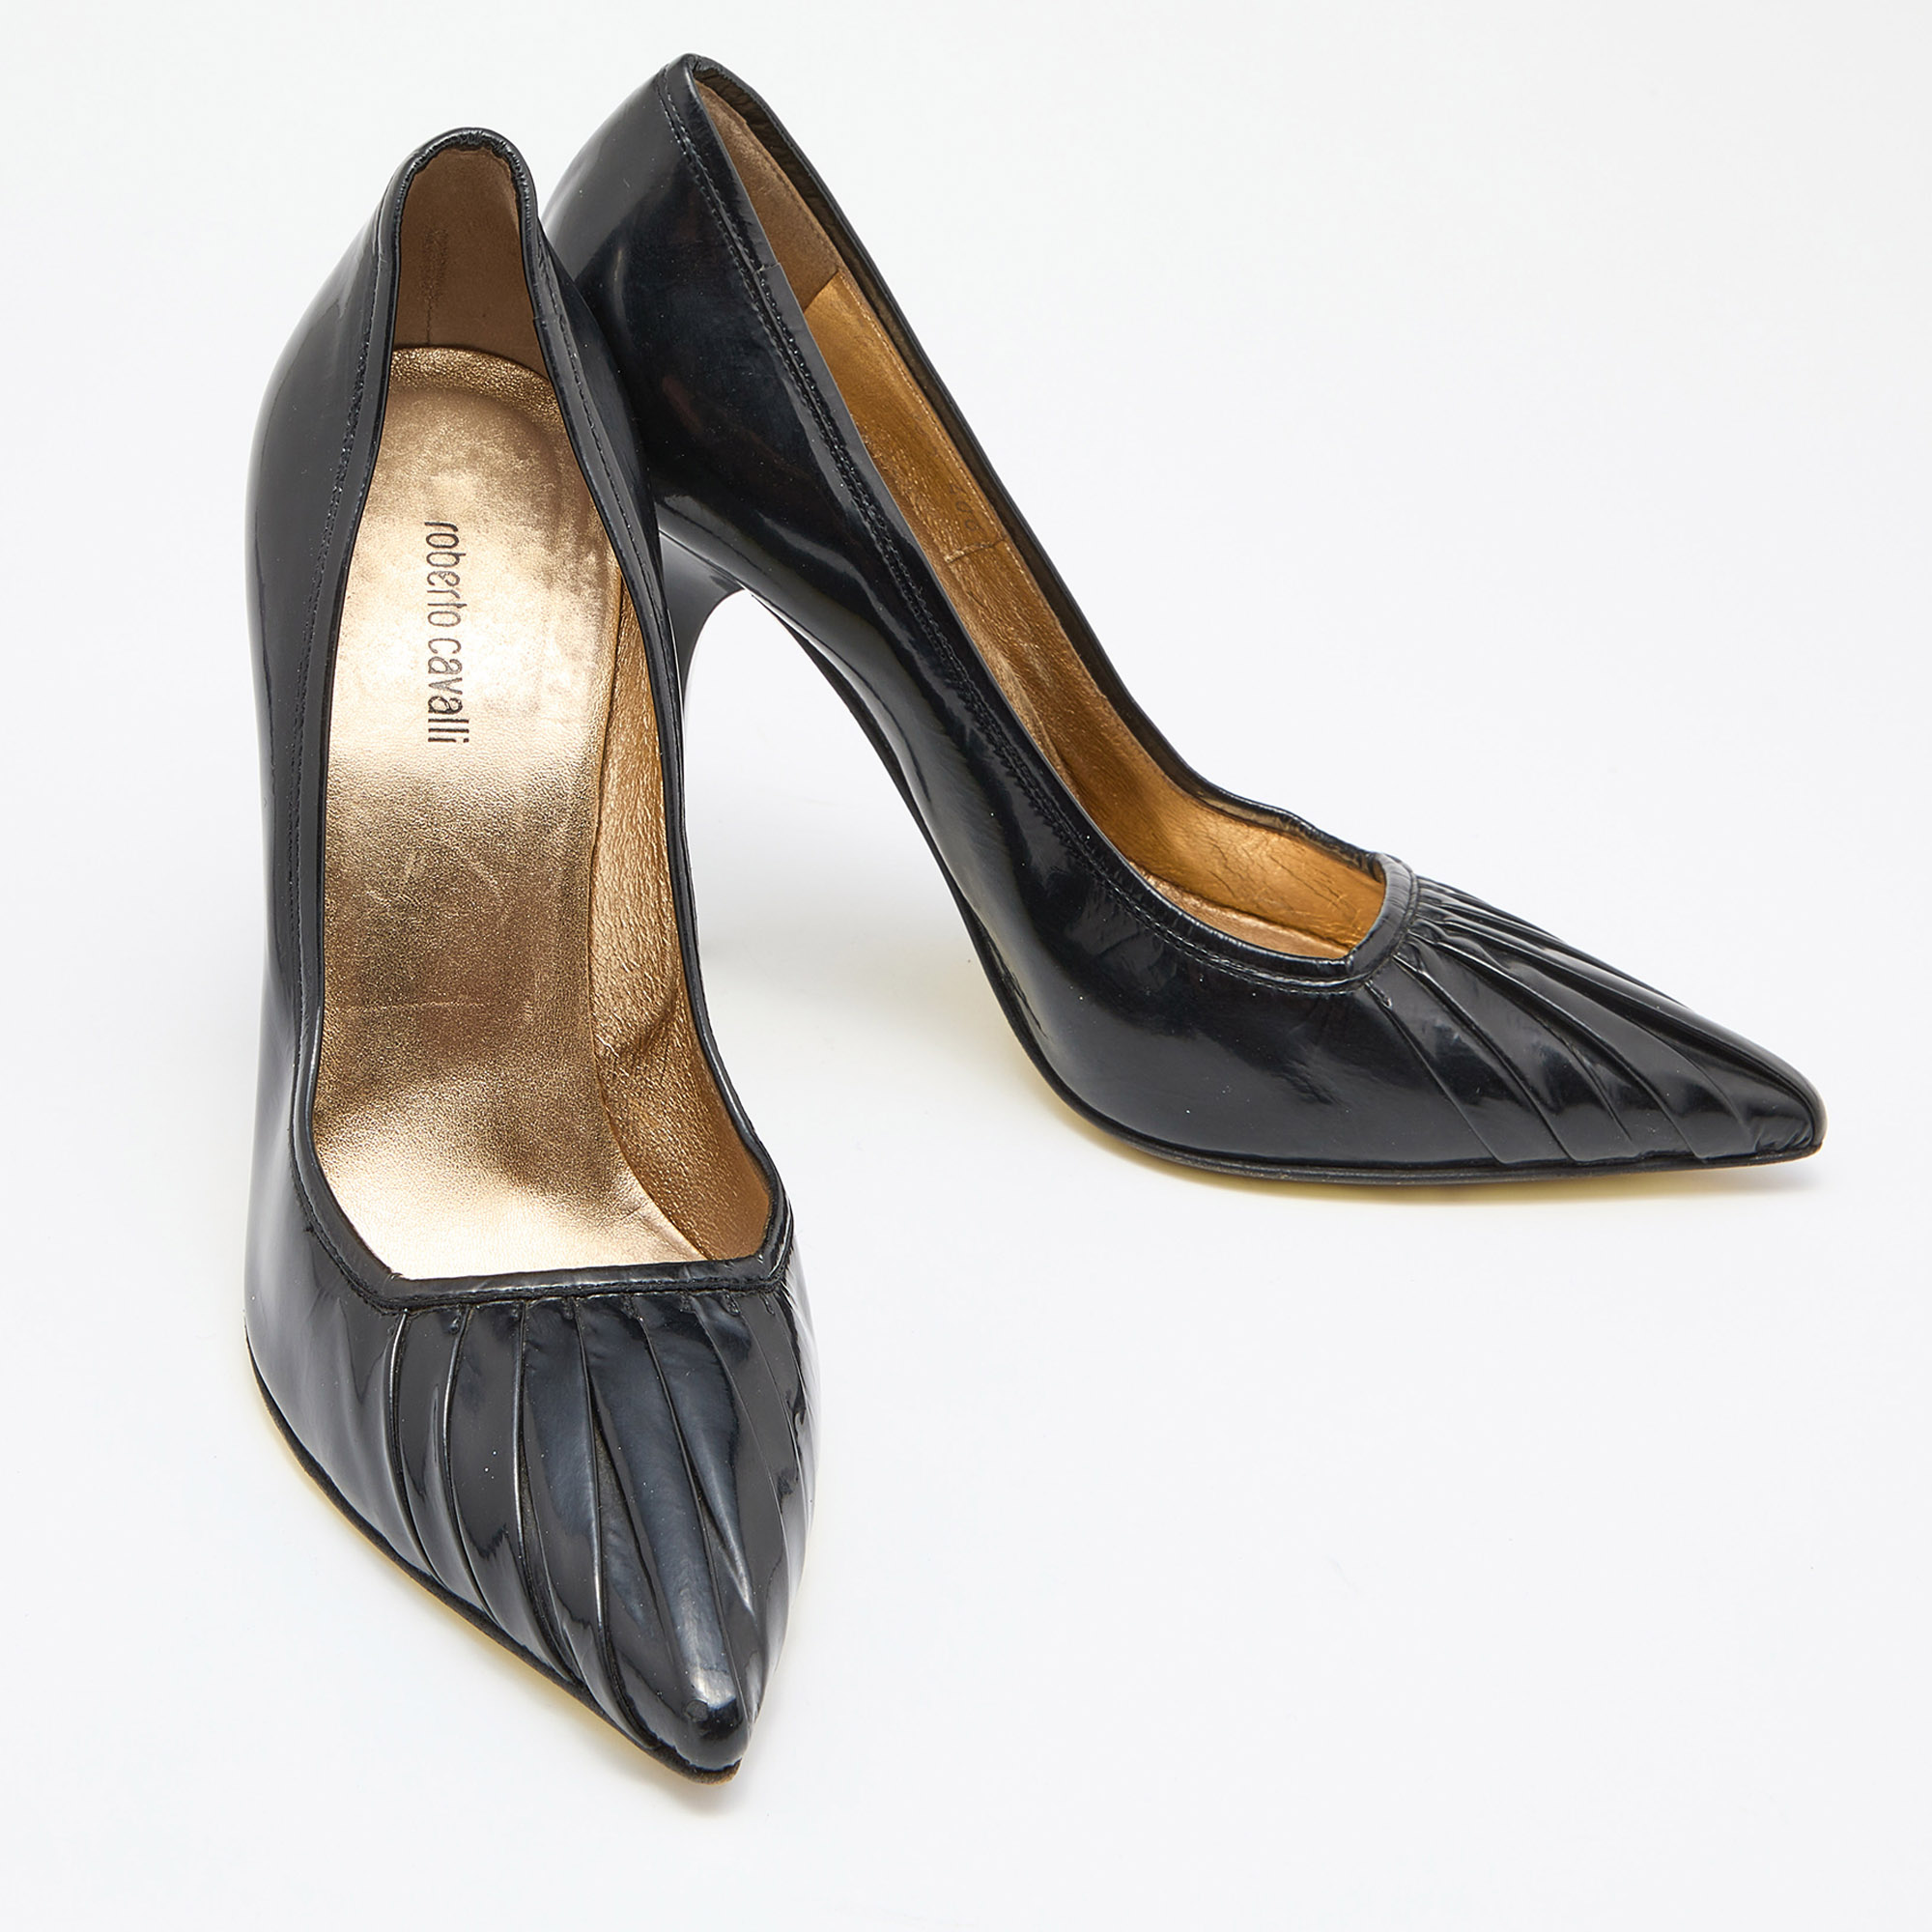 Roberto Cavalli Black Pleated Patent Leather Pointed Toe Pumps Size 36.5